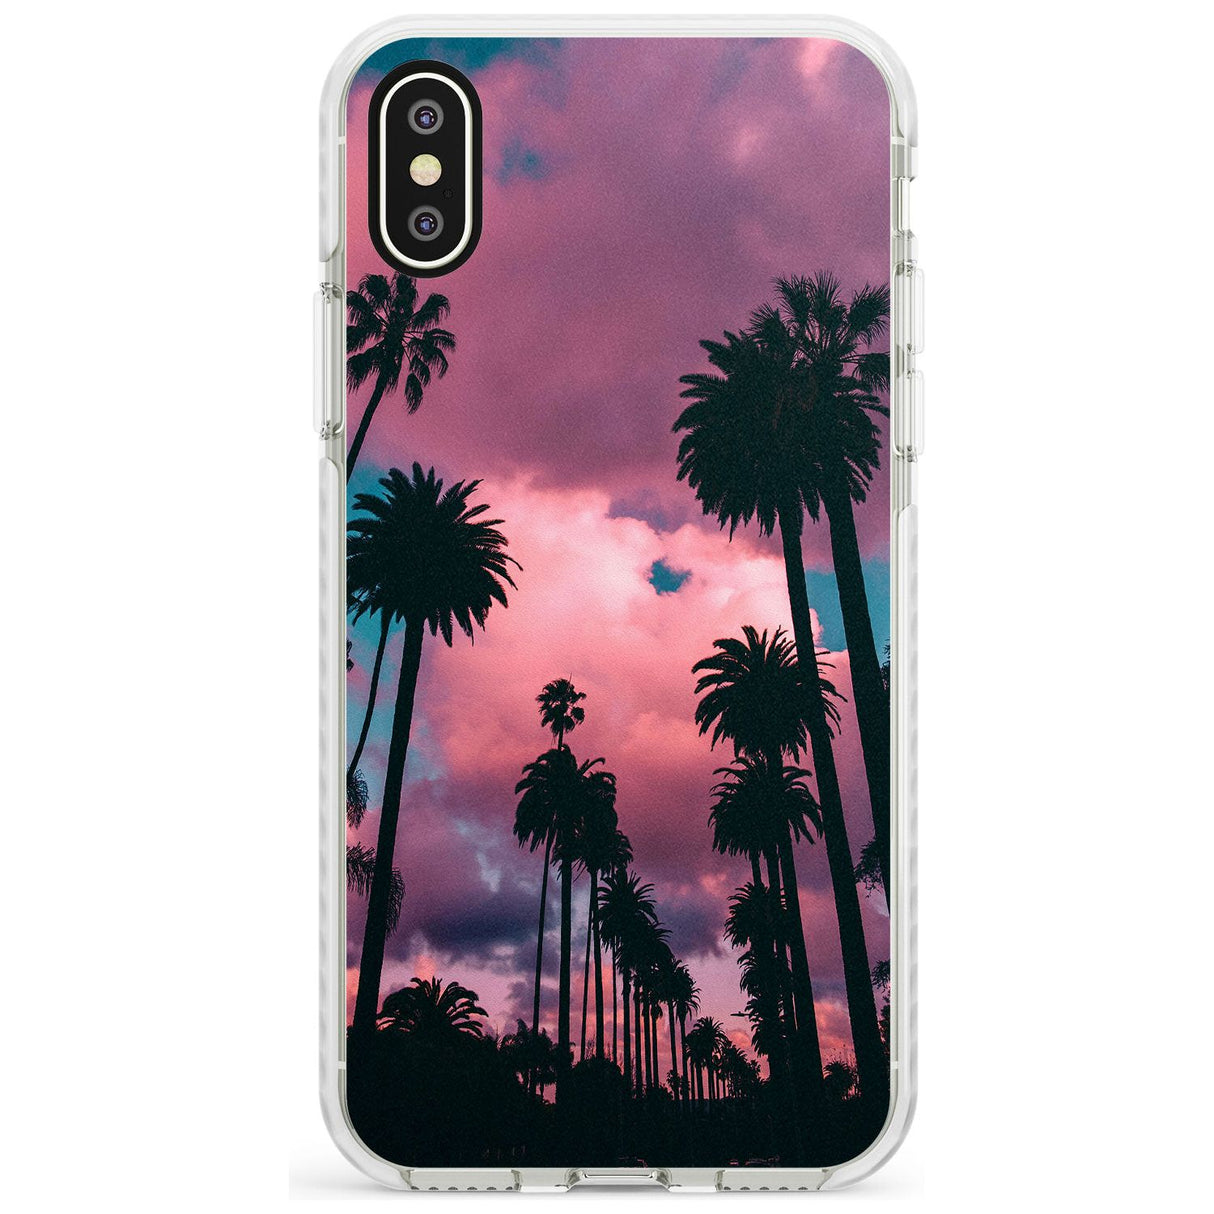 Palm Tree Sunset Photograph Impact Phone Case for iPhone X XS Max XR